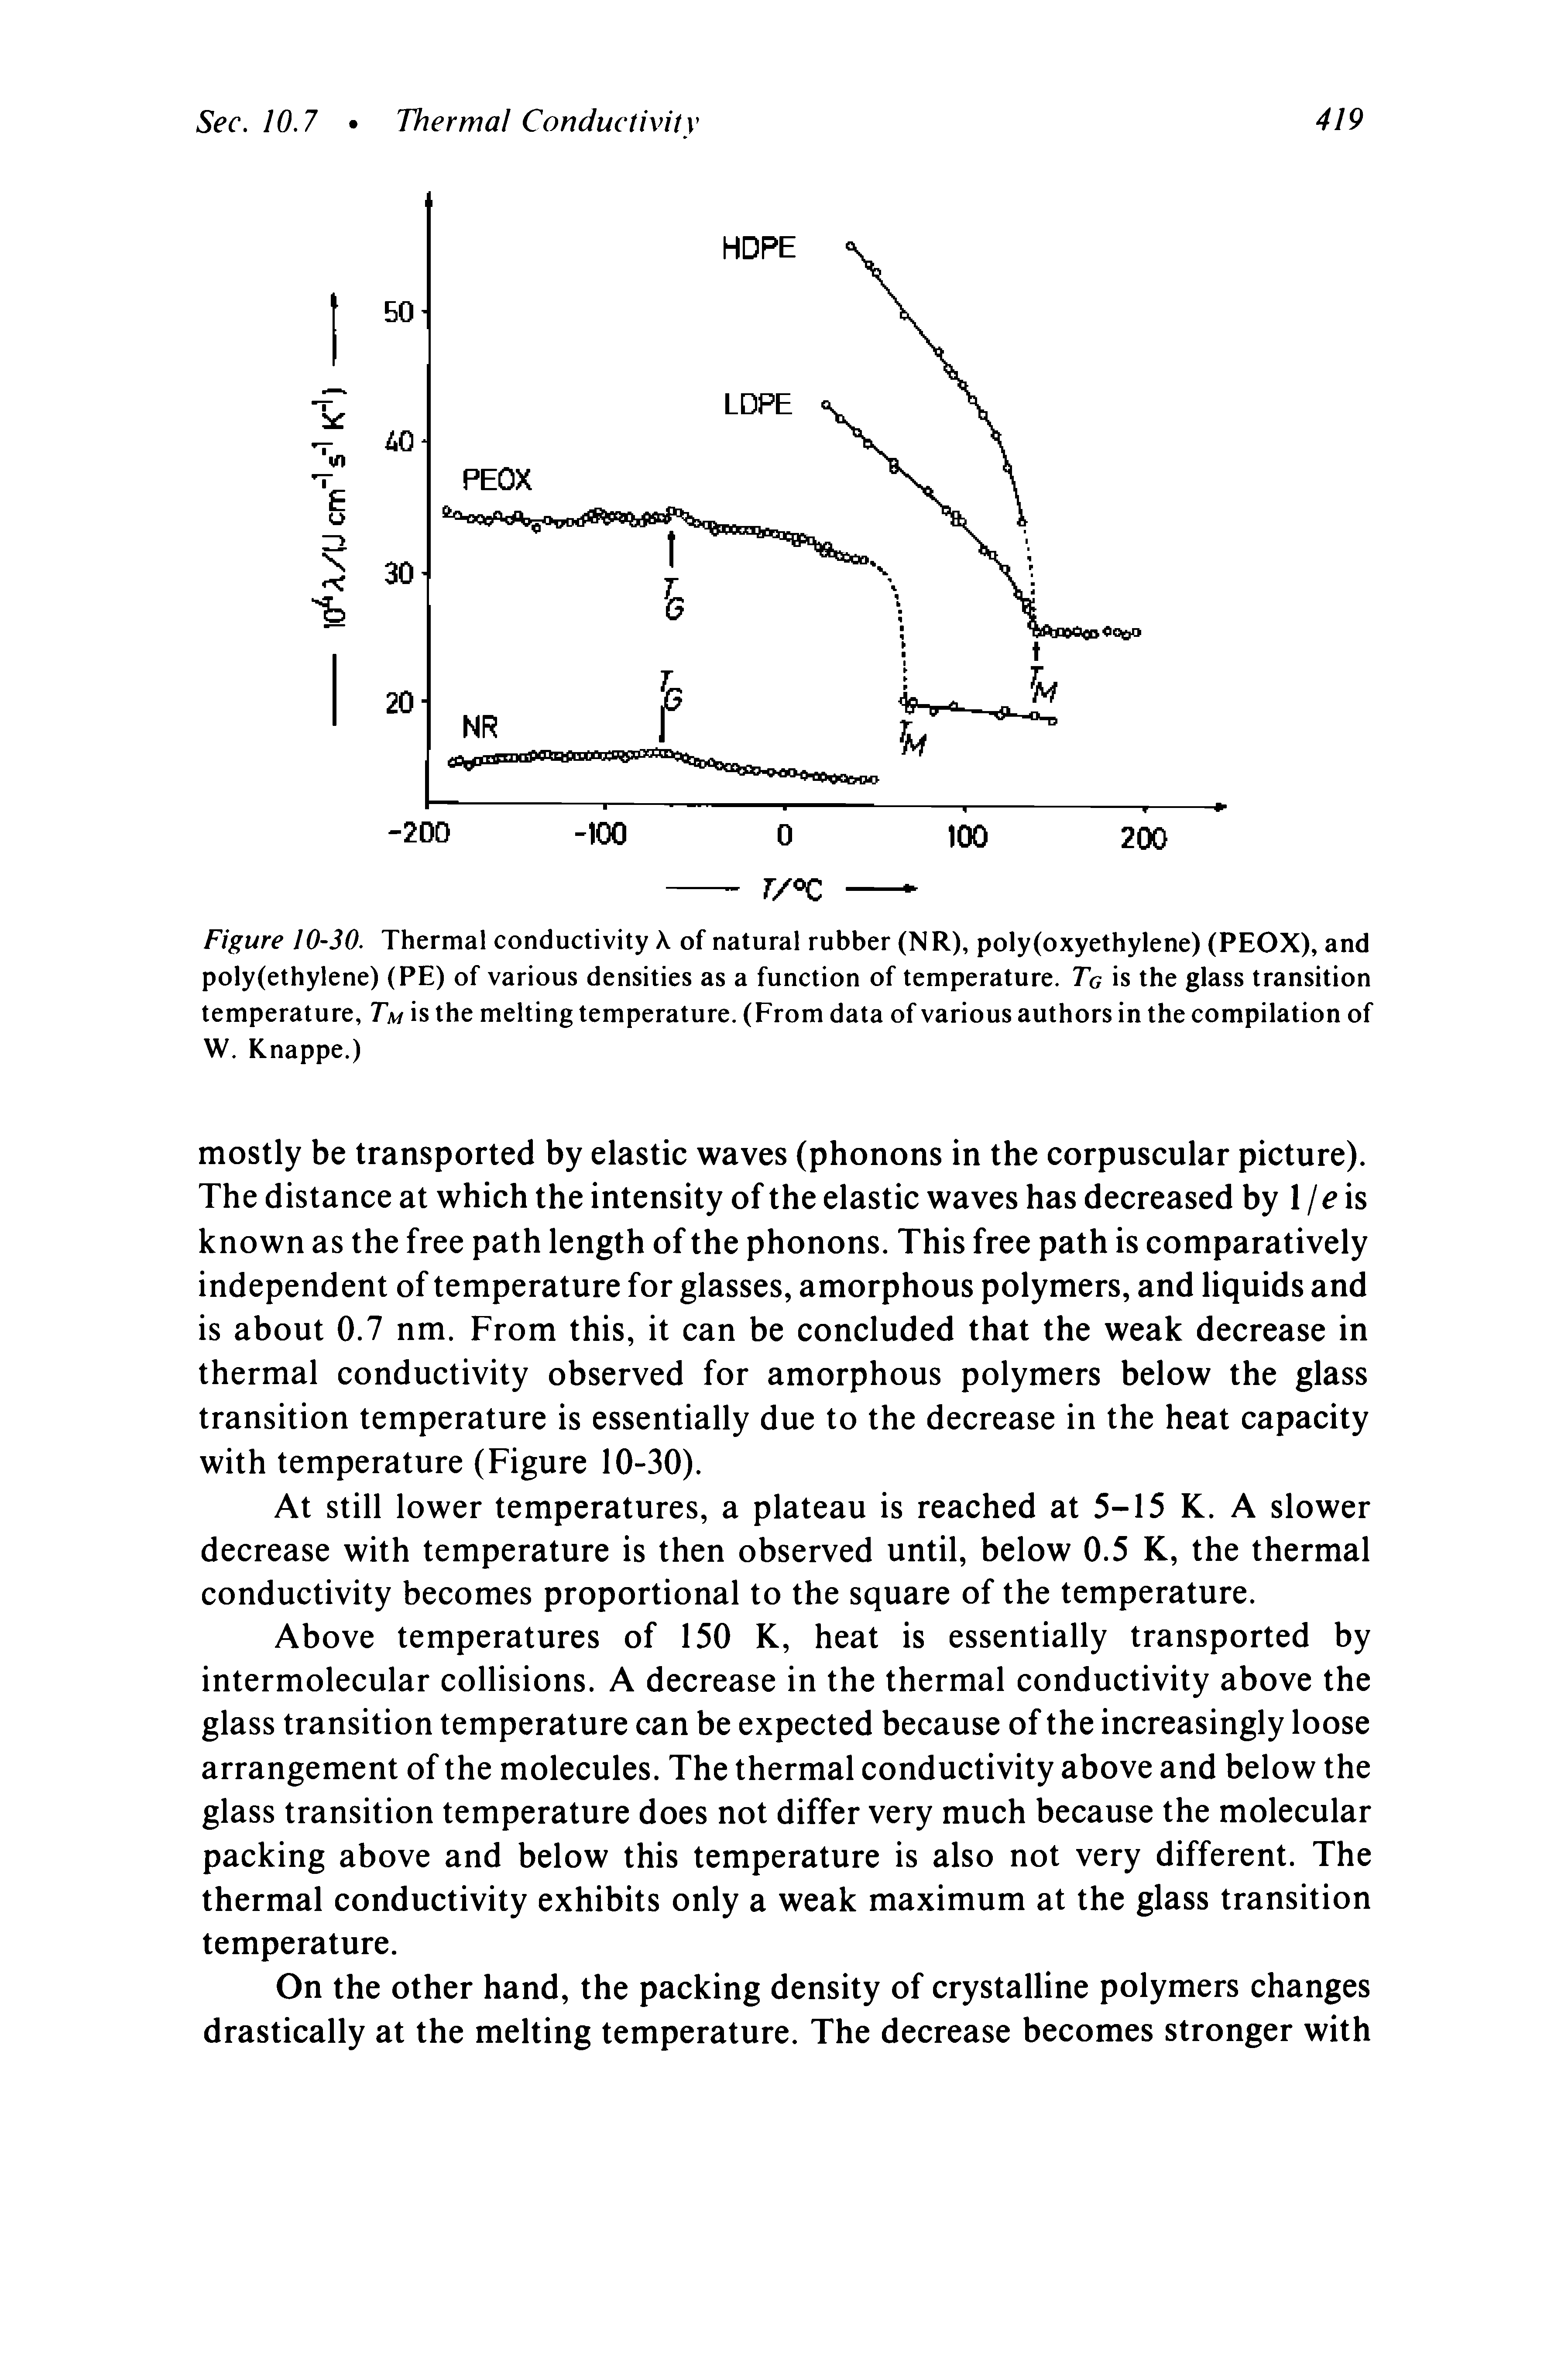 Figure 10-30. Thermal conductivity k of natural rubber (NR), poly(oxyethylene) (PEOX), and poly (ethylene) (PE) of various densities as a function of temperature. Tg is the glass transition temperature, Tm is the melting temperature. (From data of various authors in the compilation of W. Knappe.)...